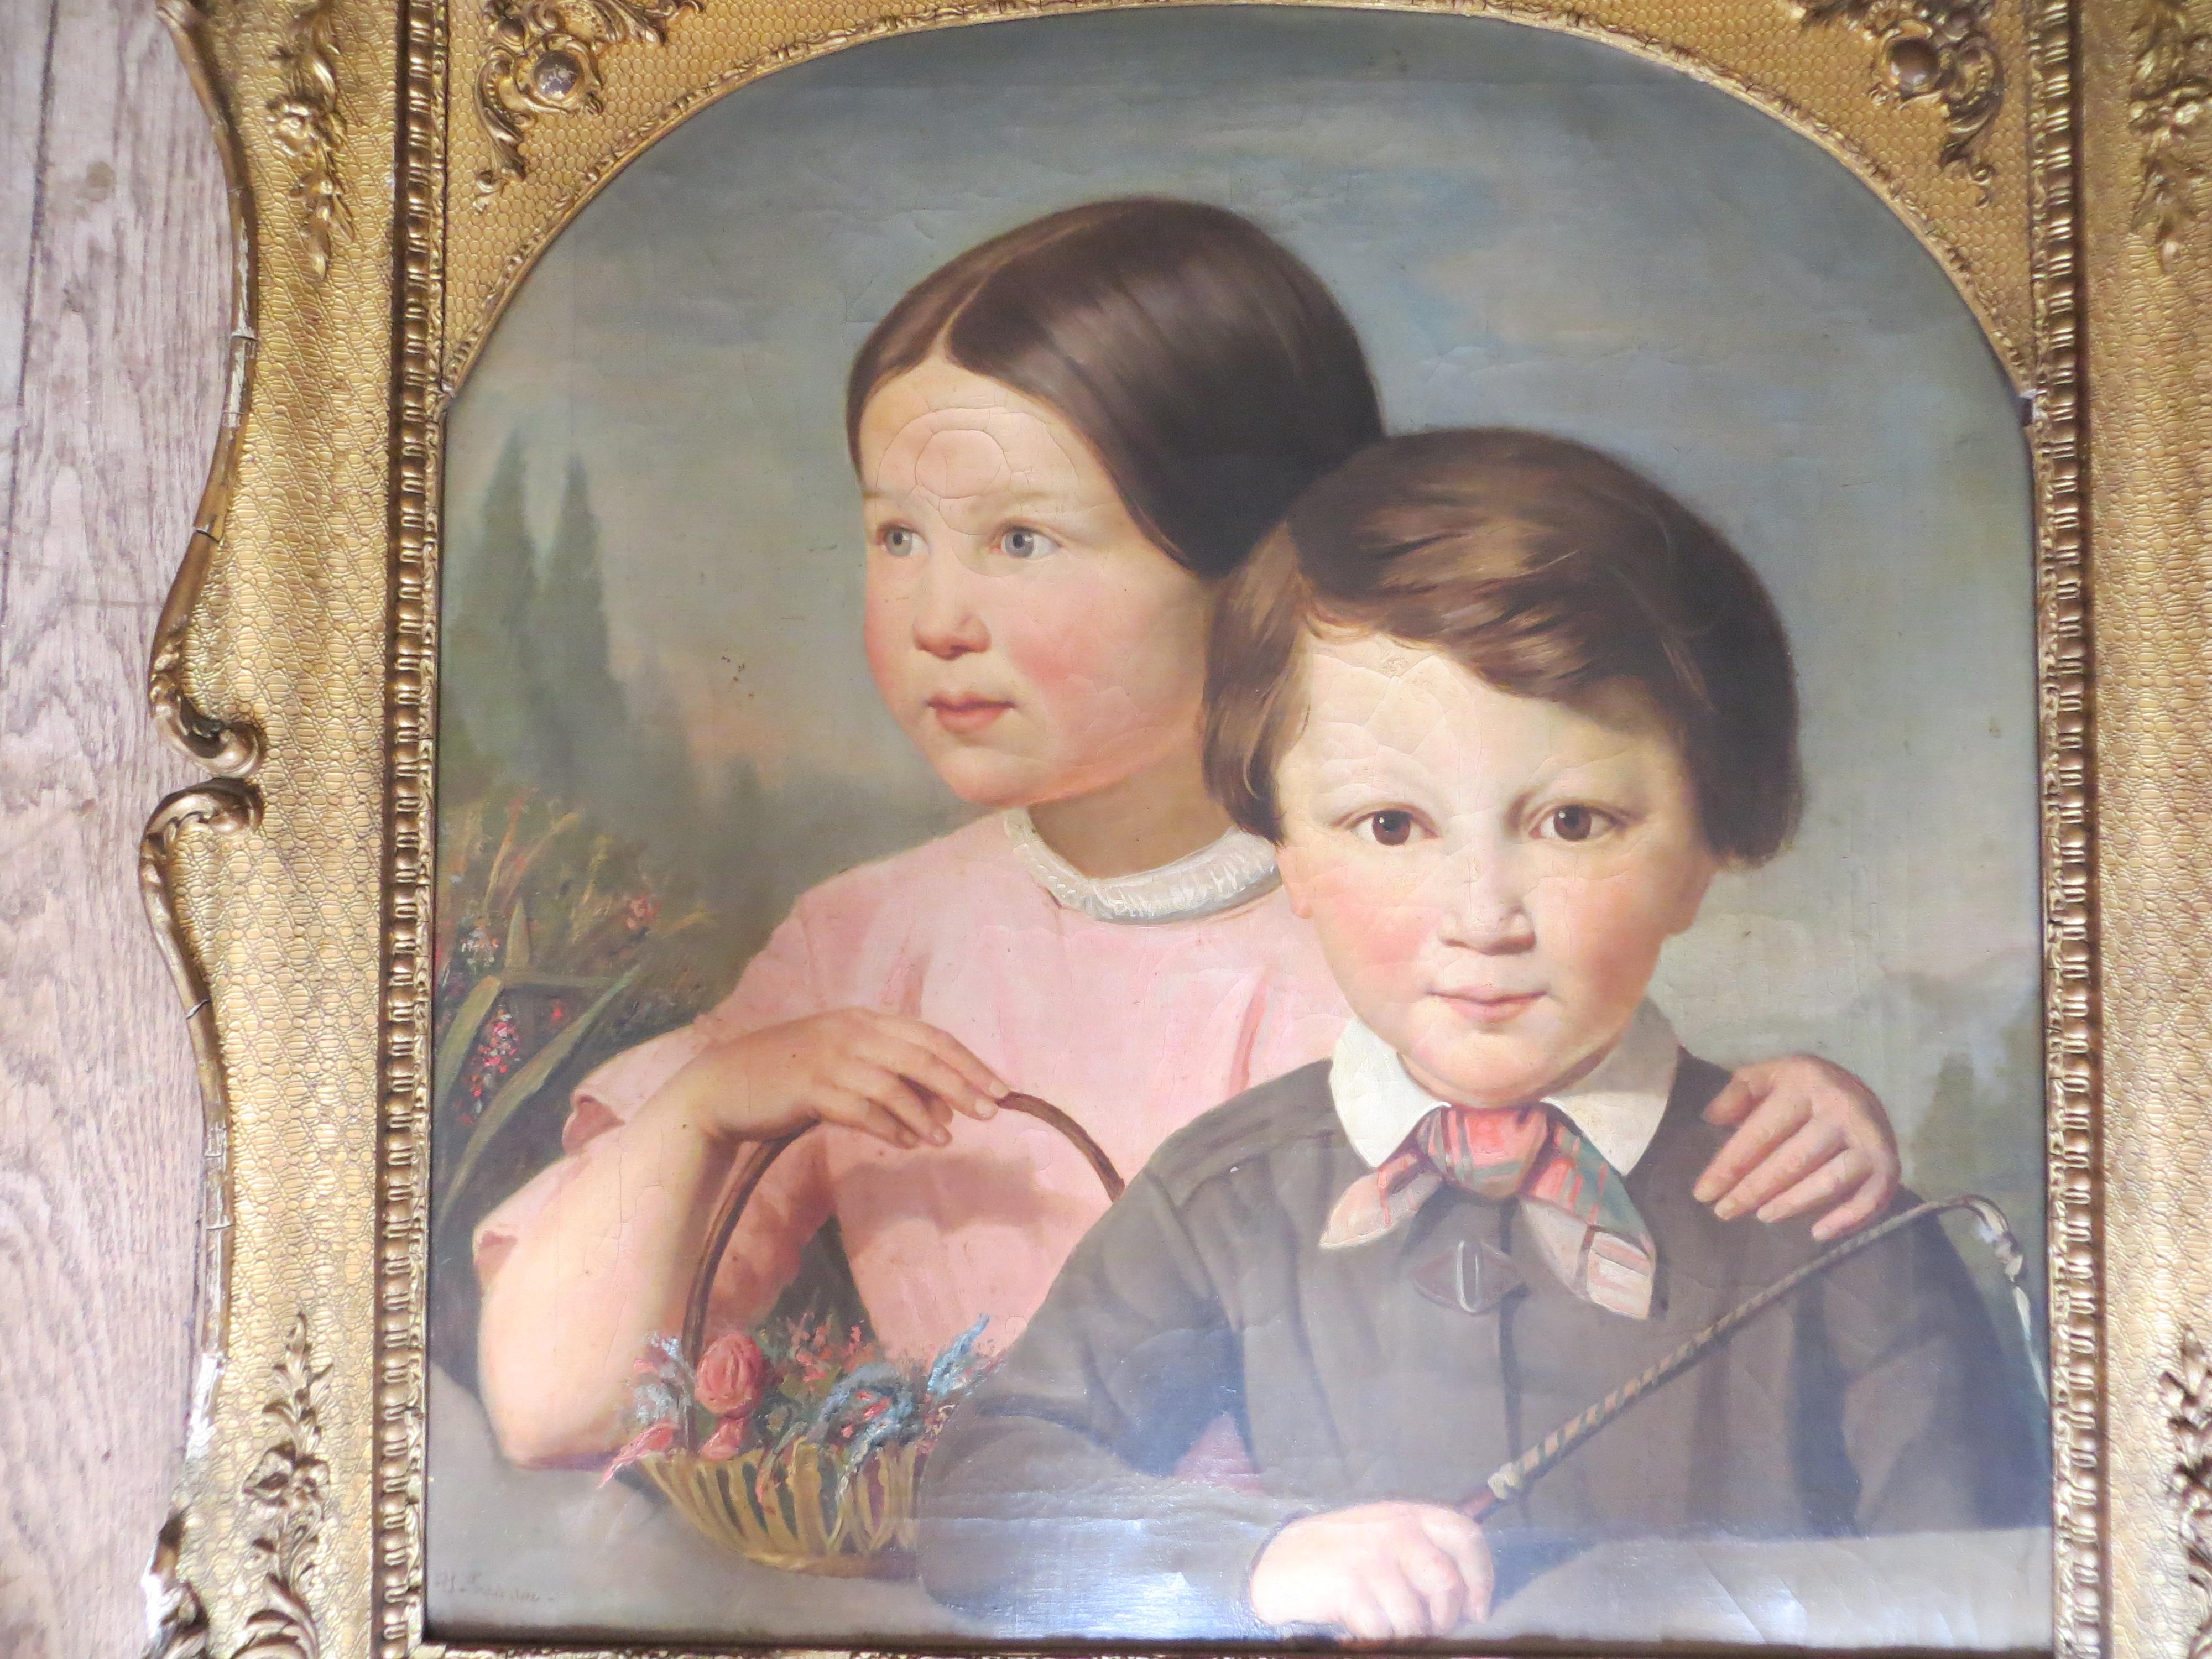 Boy and Girl with  flowers and whip  - Painting by Unknown